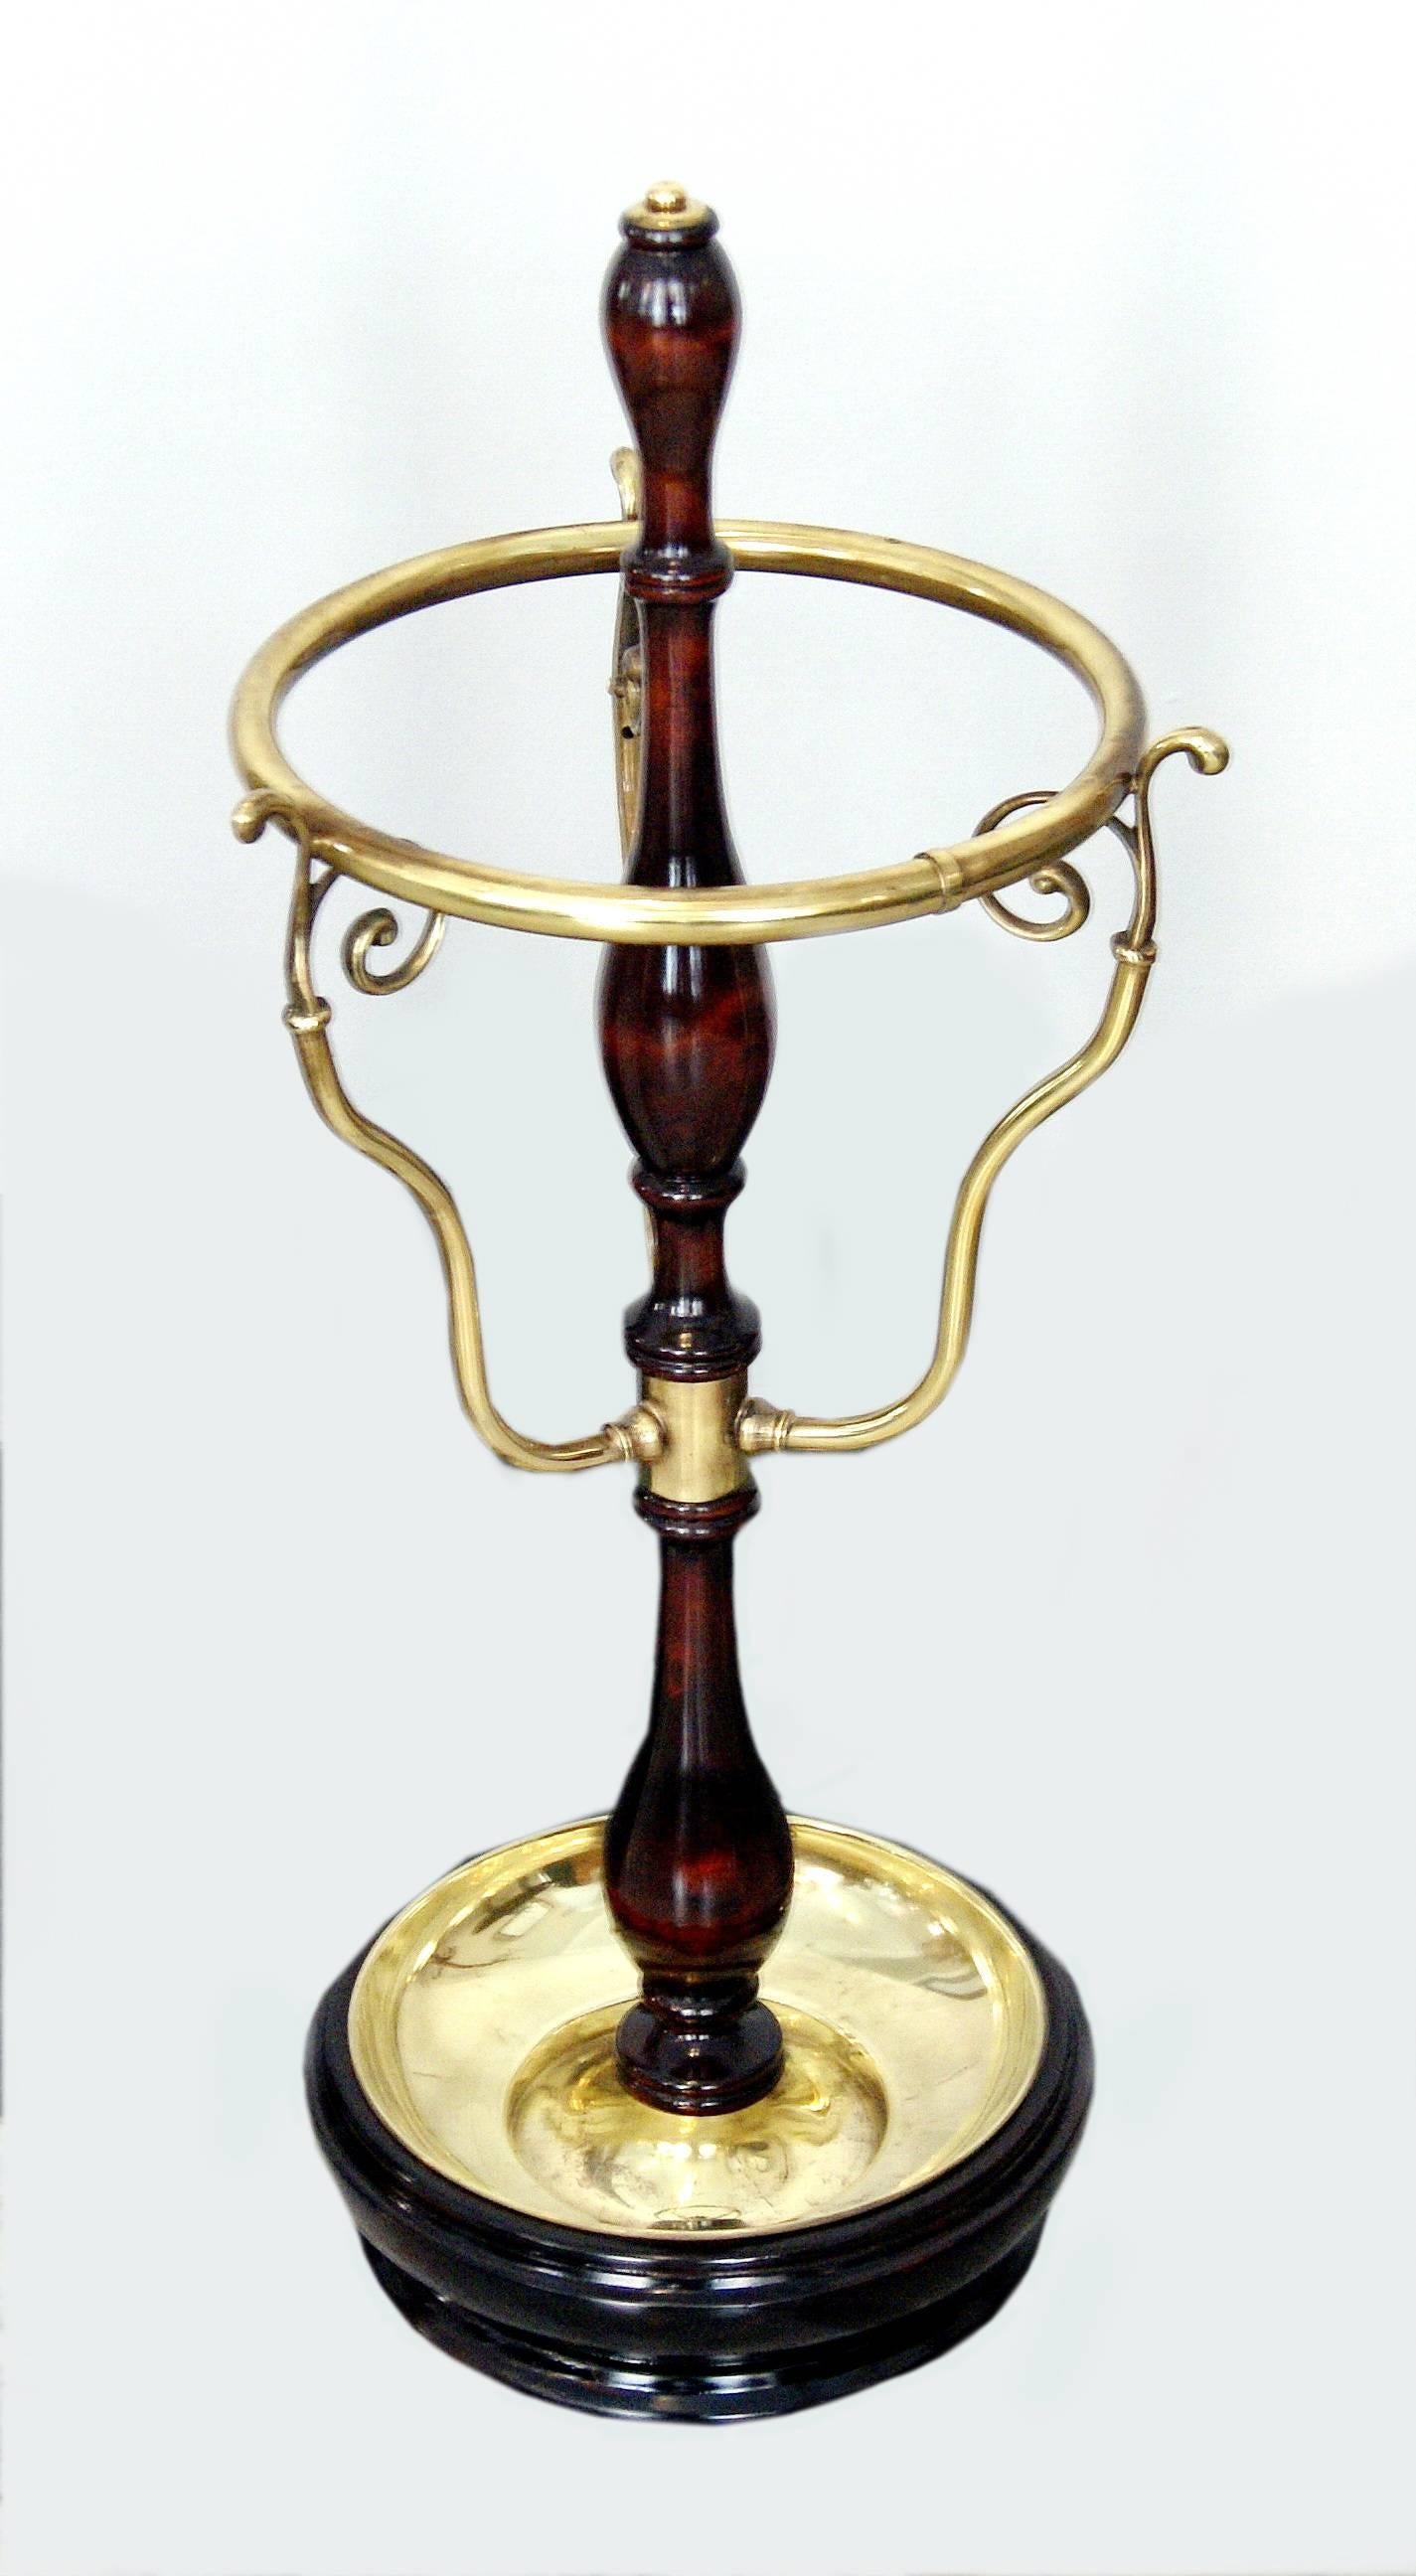 Vienna most elegant Art Nouveau umbrella stand (for holding umbrellas)

This model was certainly created circa 1900. 
The umbrella stand consists of a wooden as well as partially bulged stalk attached to round base which is covered by brass